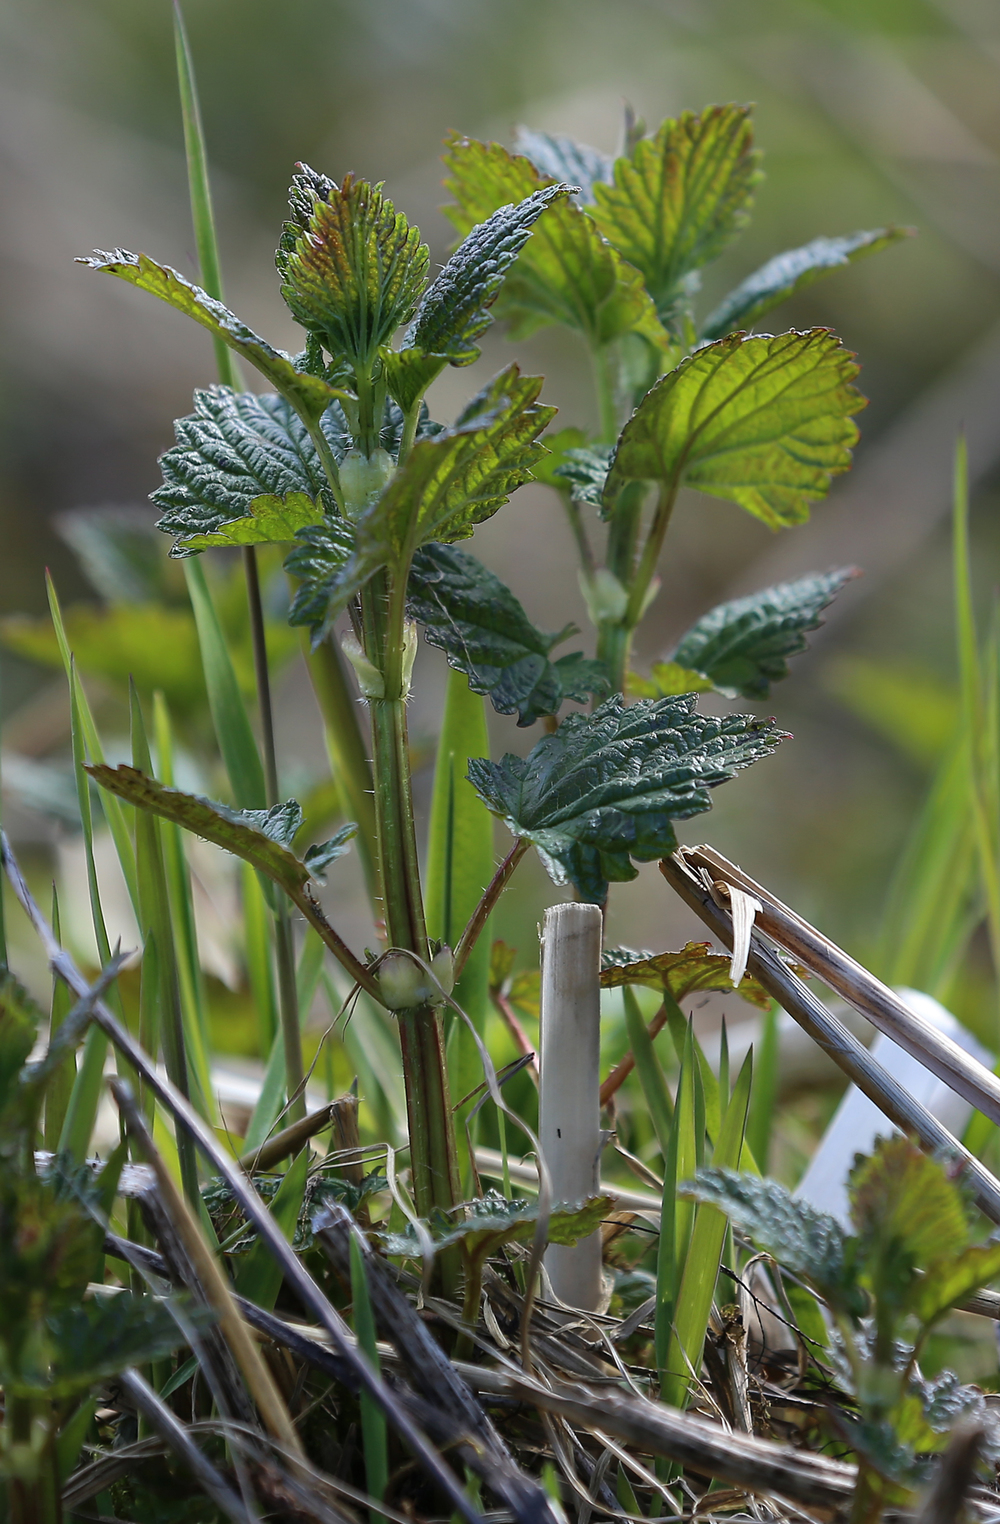 Young nettle plants found near a river.